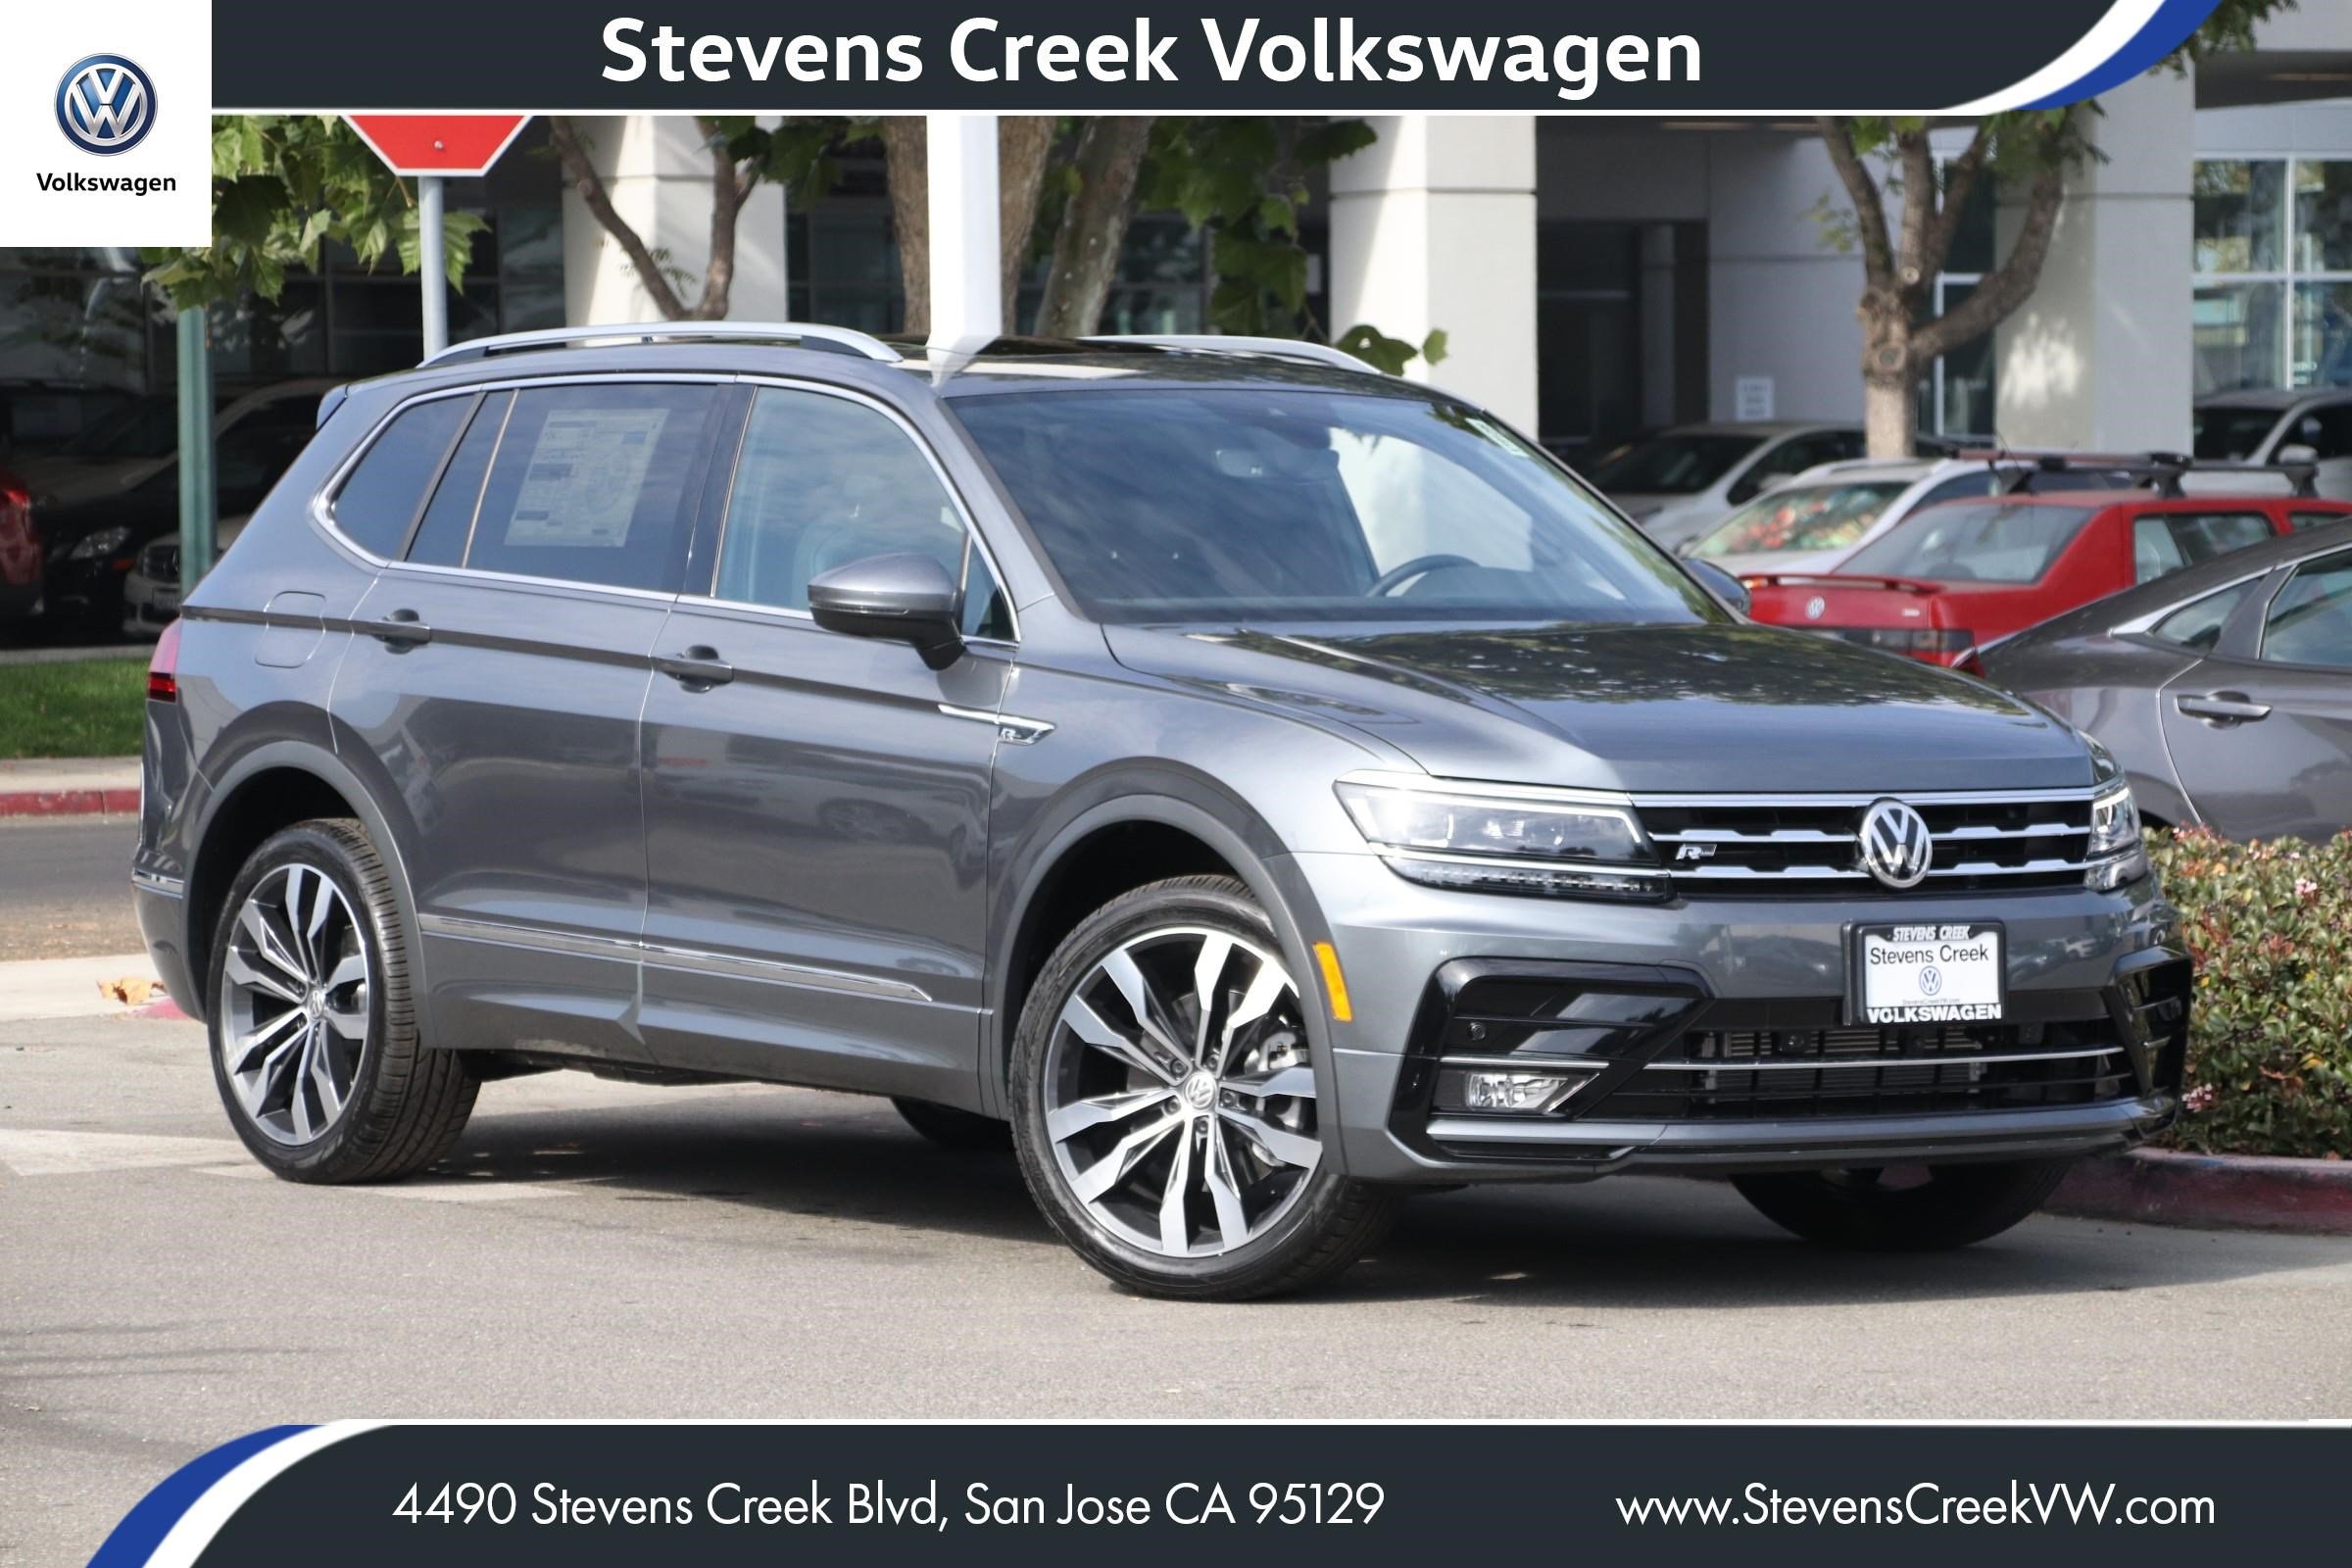 New 2019 Volkswagen Tiguan Sel Premium R Line With Navigation Awd